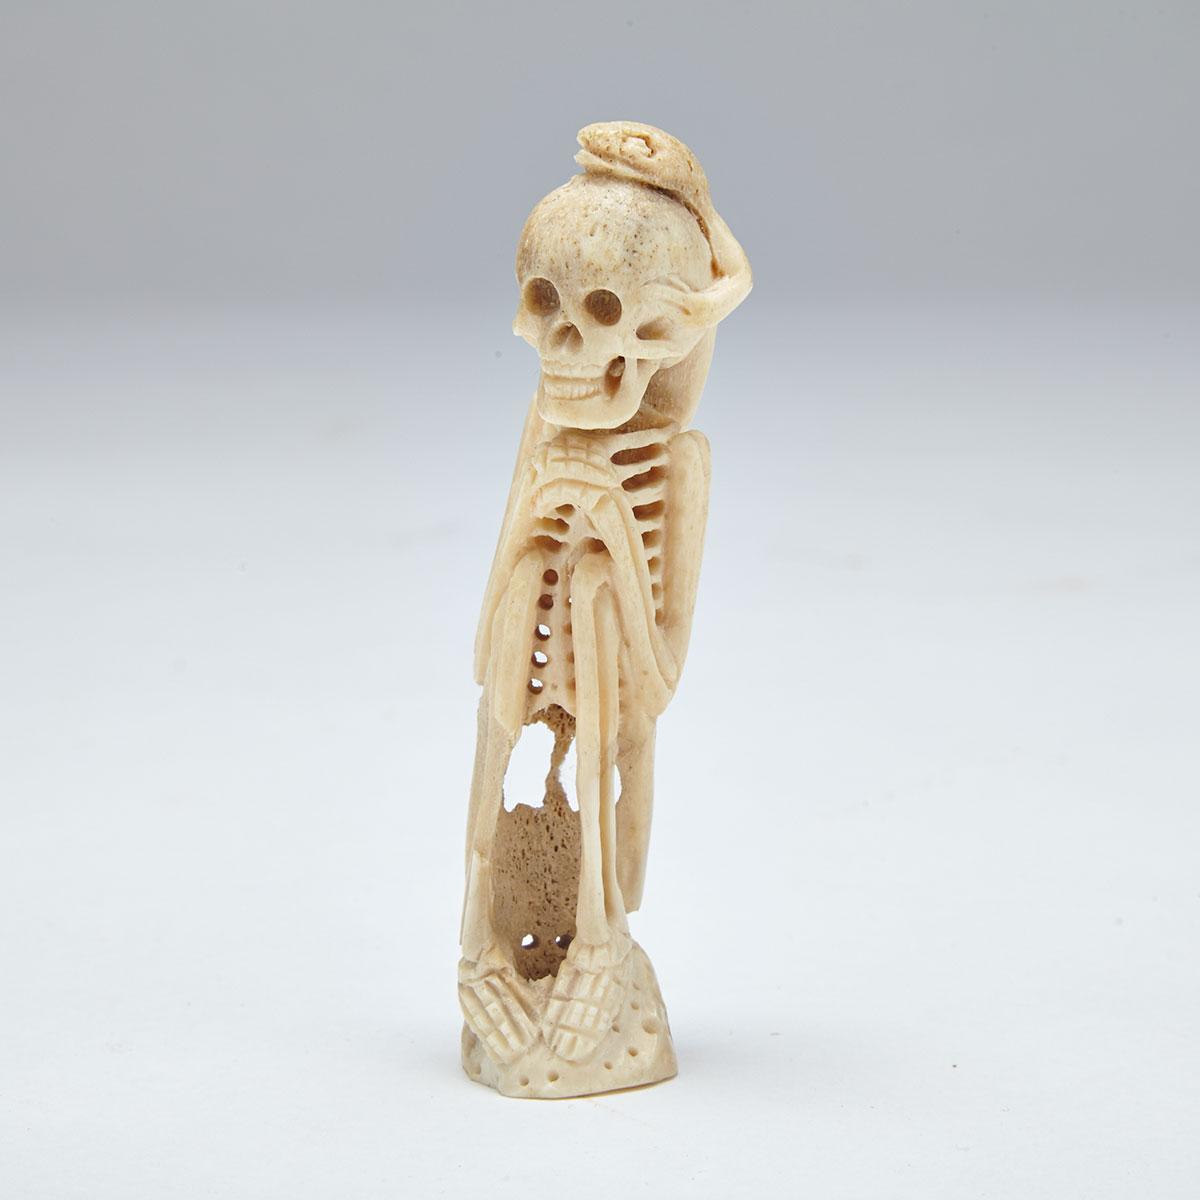 Small Memento Mori School Carved Bone FIgure of a Skeleton, early-mid 20th century